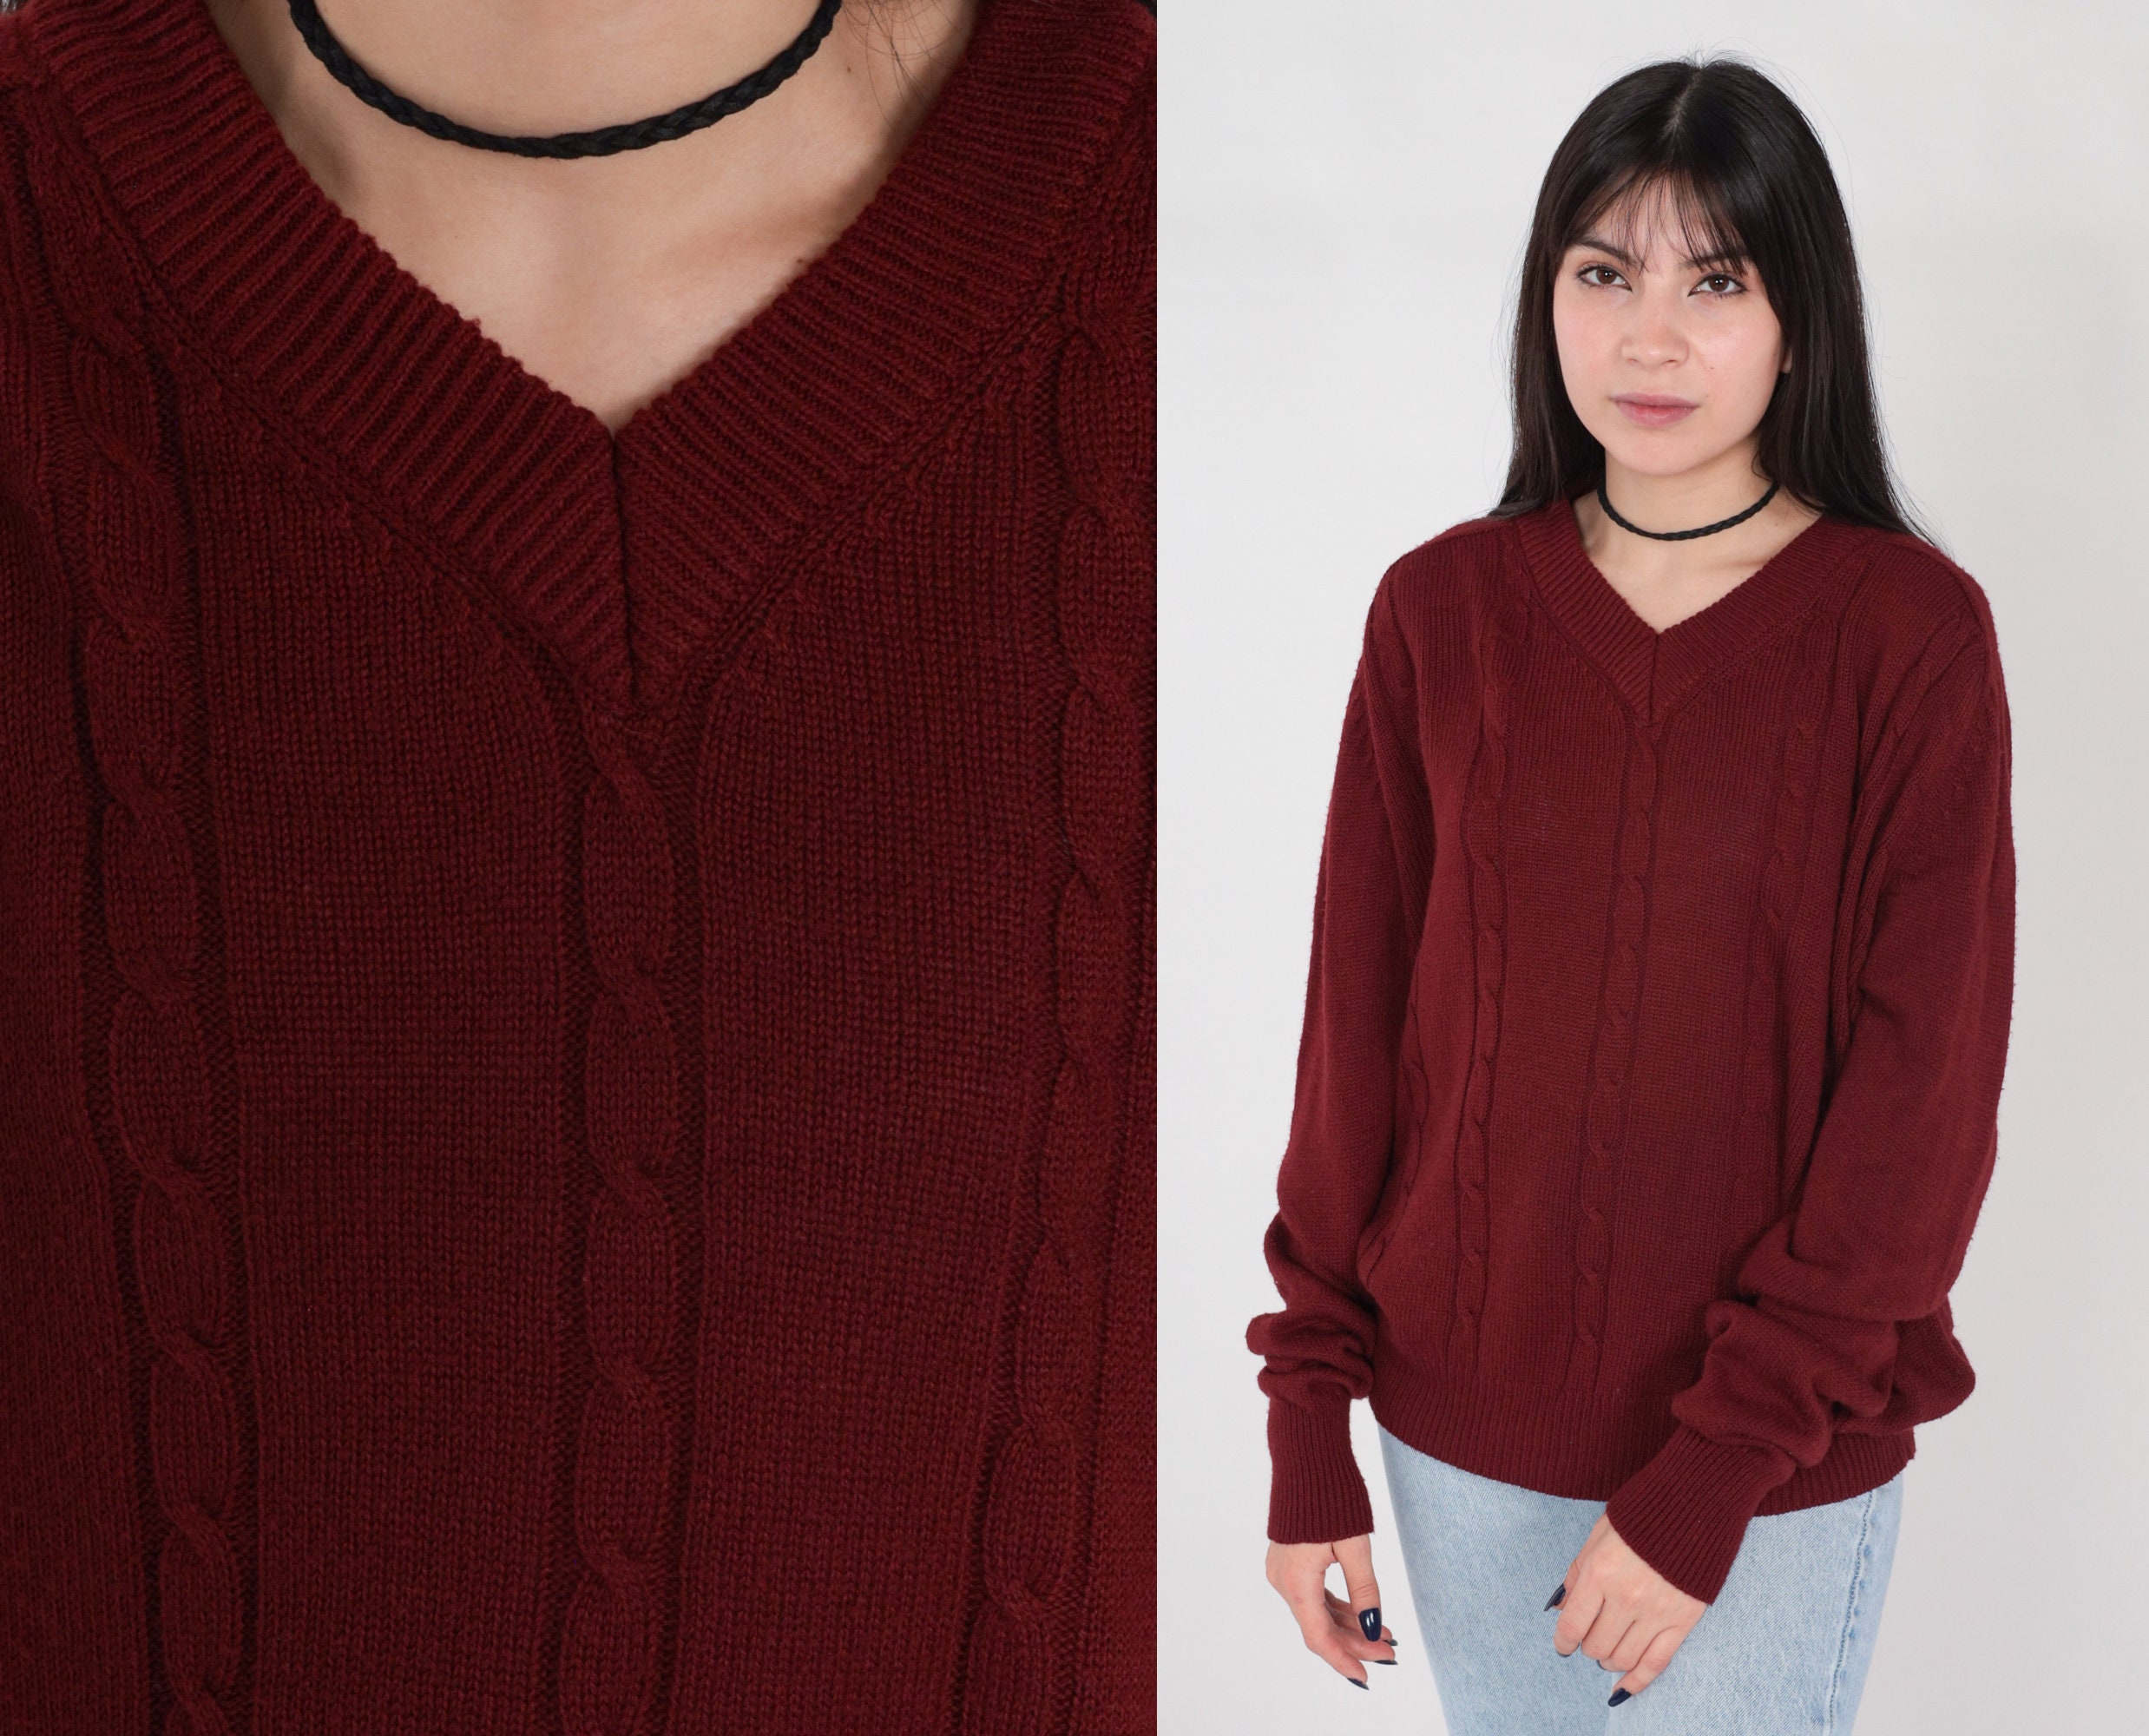 stormloop Implicaties comfortabel Maroon Sweater 80s Cable Knit Pullover Sweater V Neck Simple Basic Plain  Fall Chunky Cableknit Jumper Acrylic Vintage 1980s Mens Large L